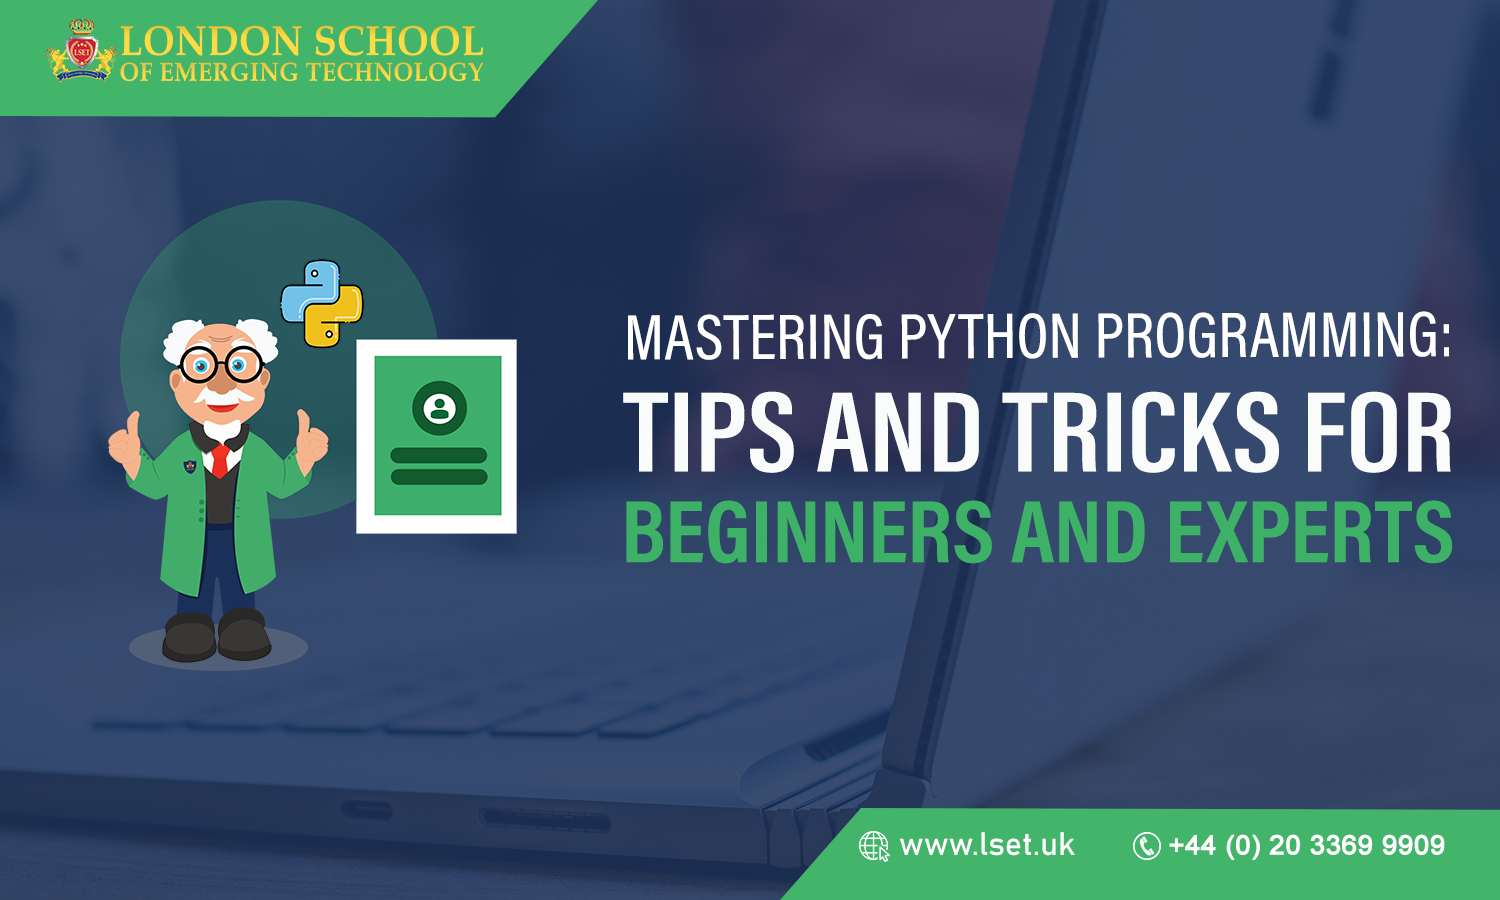 Mastering Python Programming Tips and Tricks for Beginners and Experts